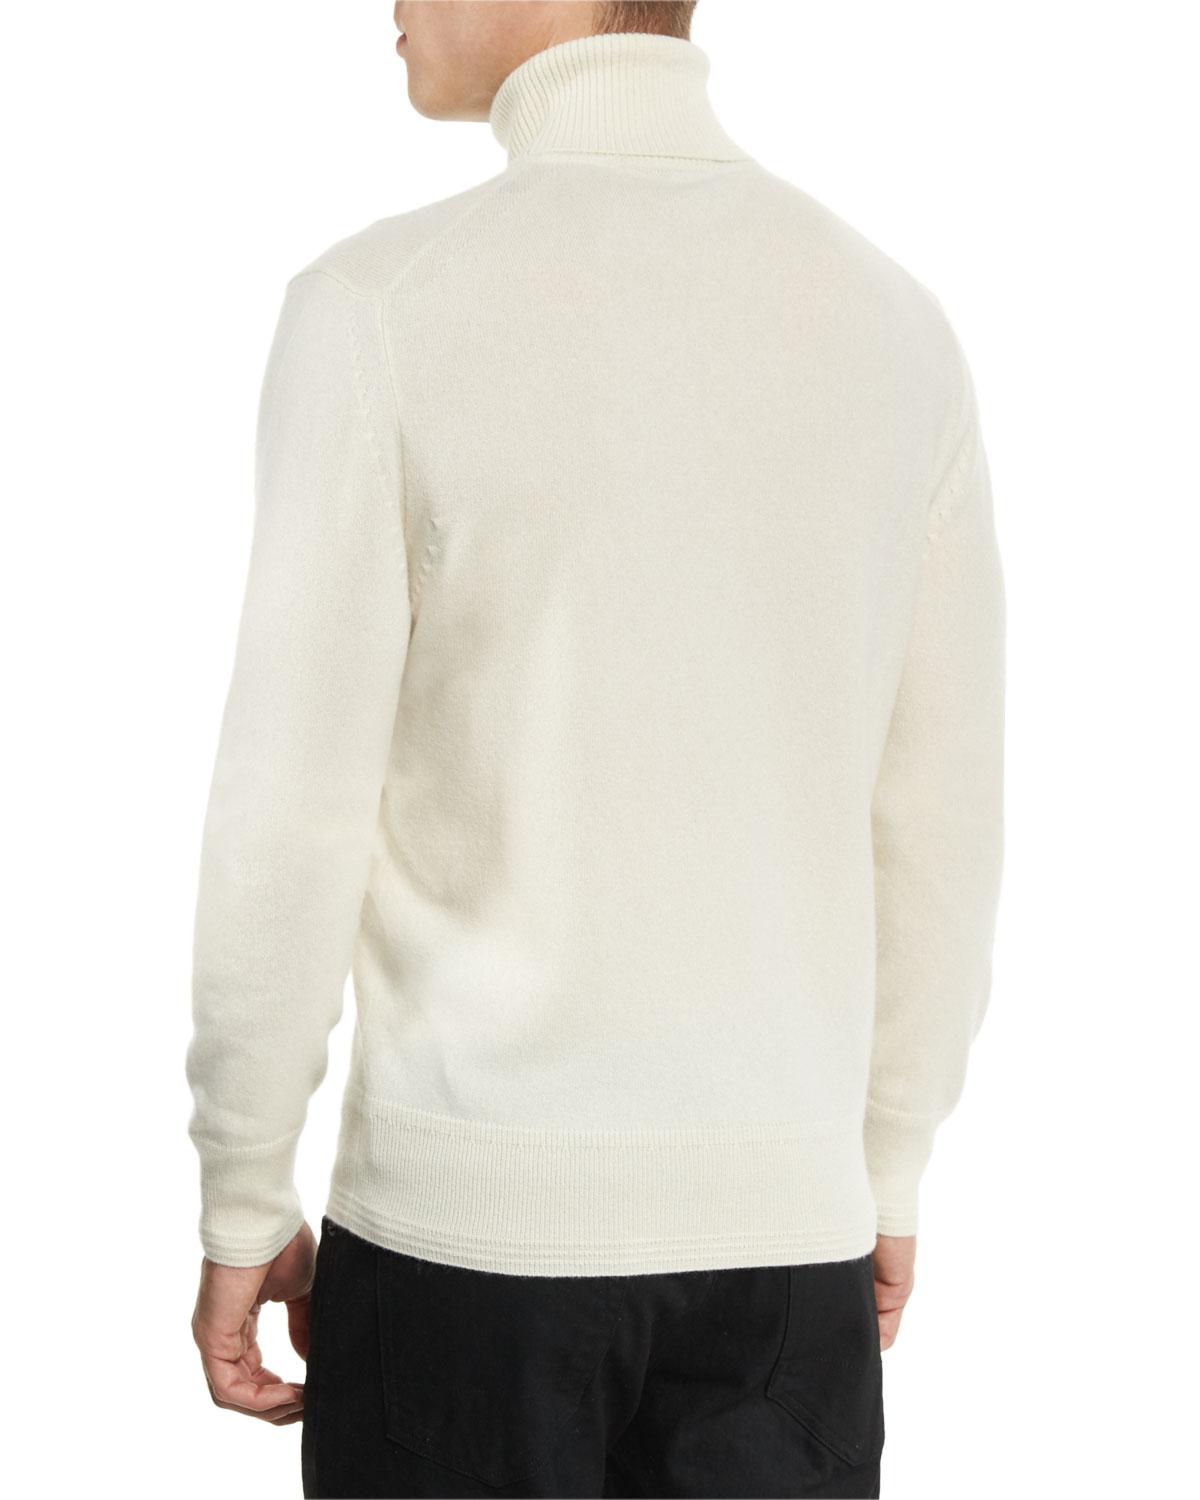 Tom Ford Classic Flat-knit Cashmere Turtleneck Sweater in White for Men ...